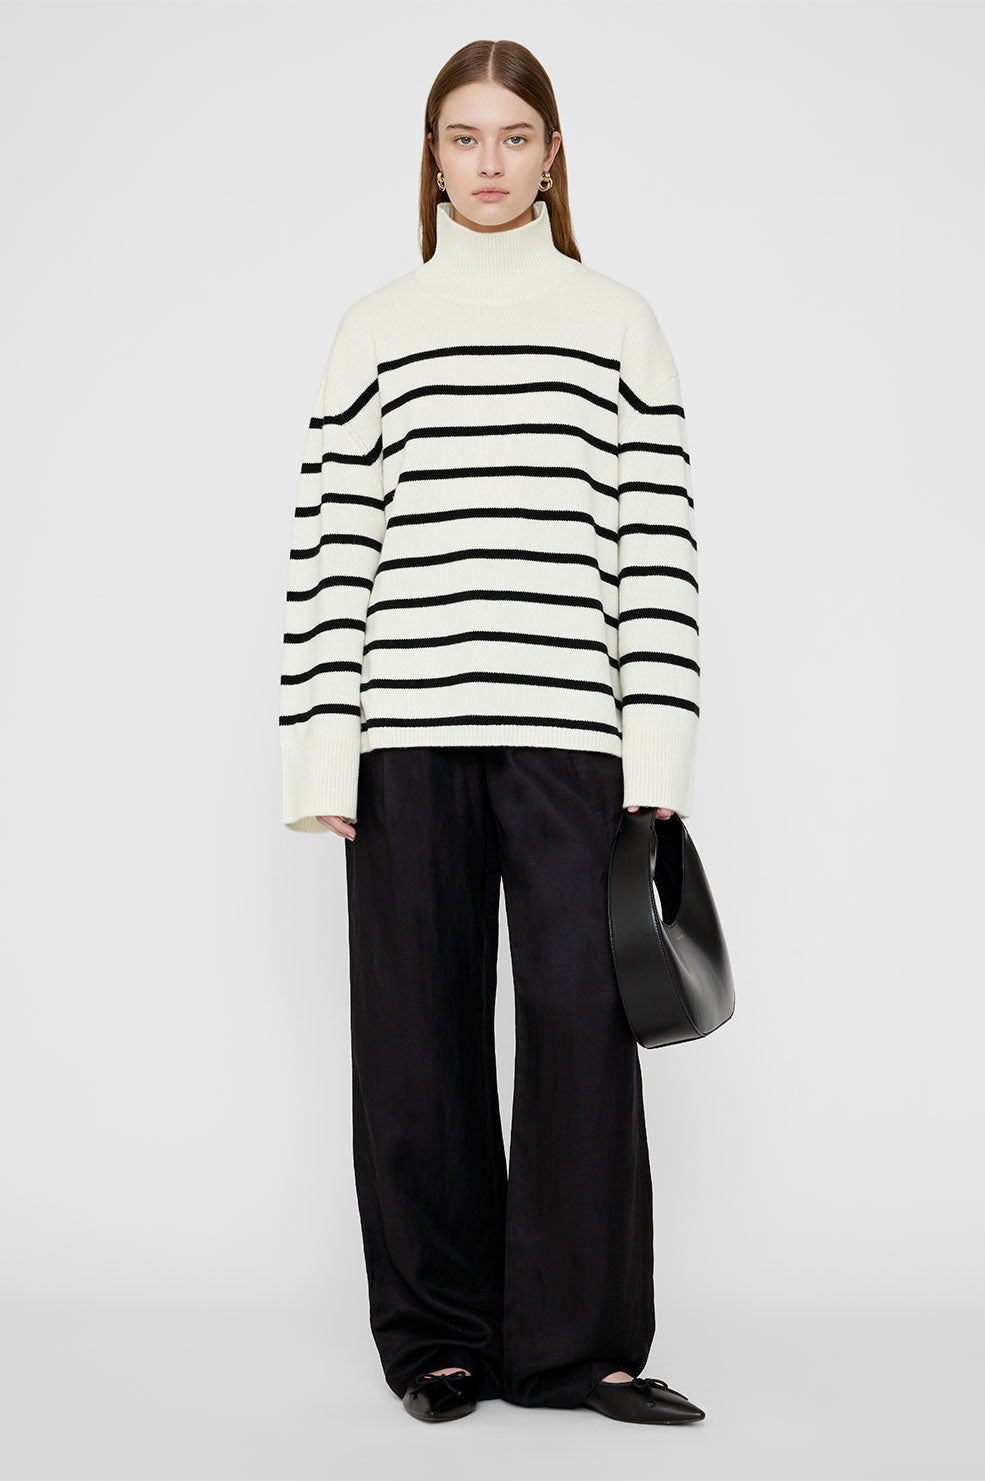 ANINE BING Courtney Sweater - Ivory And Black Stripe - On Model Front